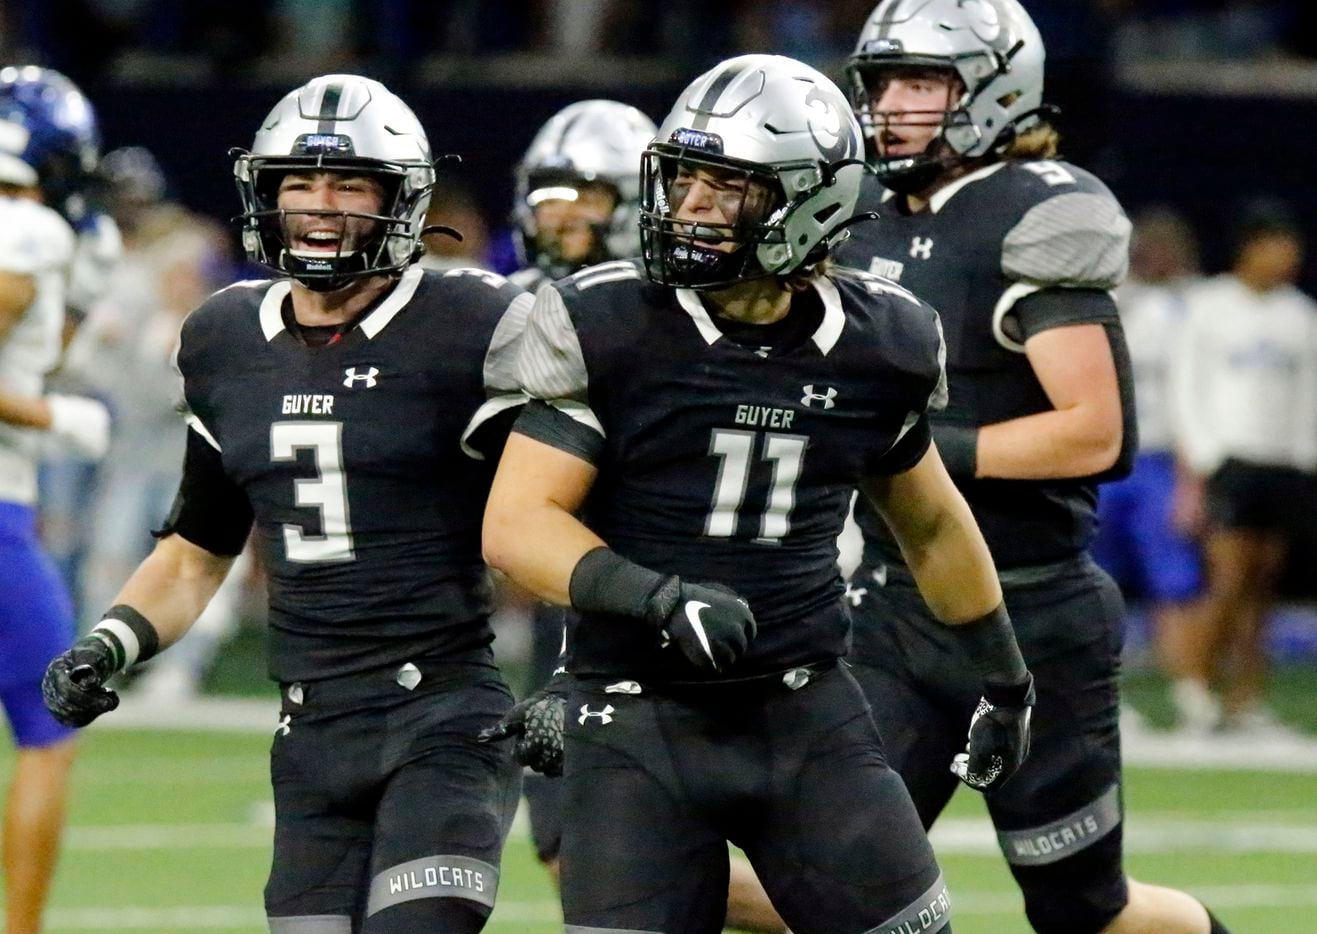 Guyer High School linebacker Carson Parham (11) celebrates his interception which would lead to a score during the first half as Denton Guyer High School played Trophy Club Byron Nelson High School in a Class 6A Division II Region I semifinal football game at The Ford Center in Frisco on Saturday, November 27, 2021. (Stewart F. House/Special Contributor)